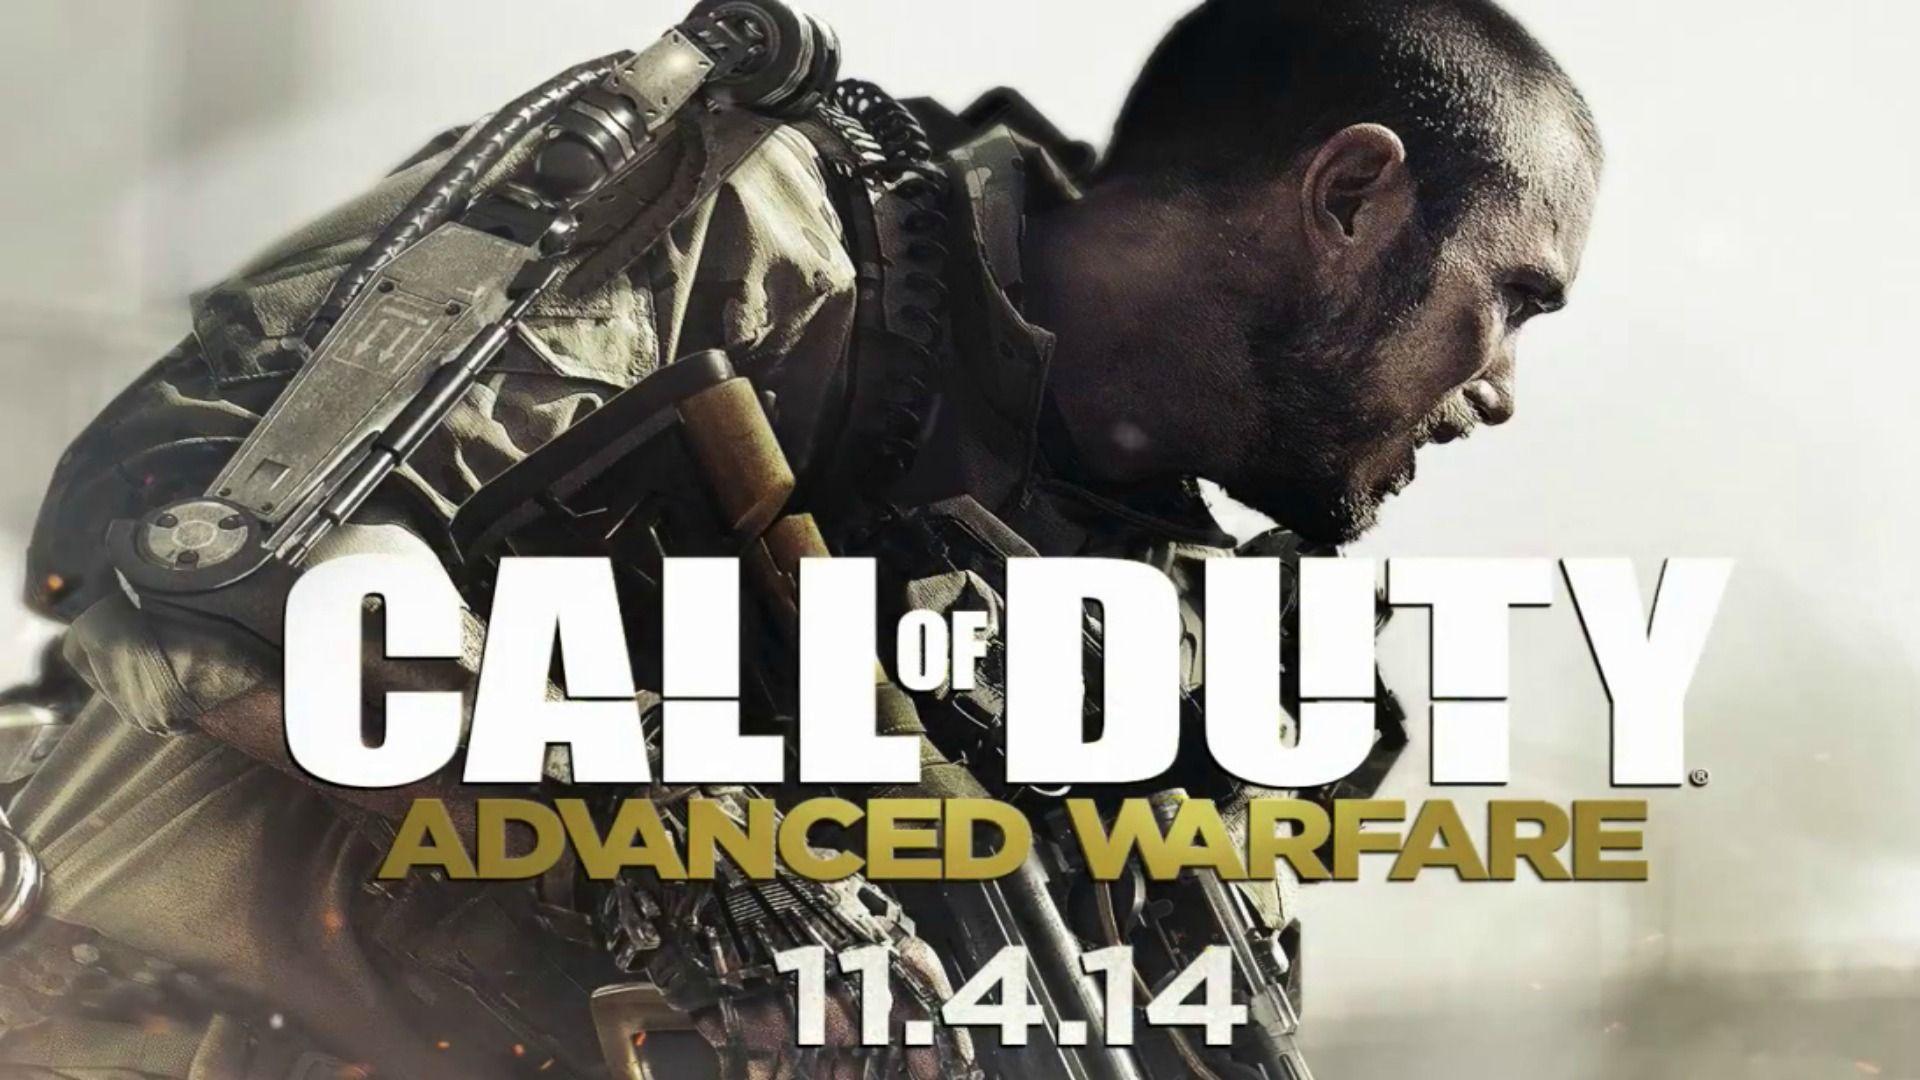 Call Of Duty Advanced Warfare Pre Order Offers Early Game Time